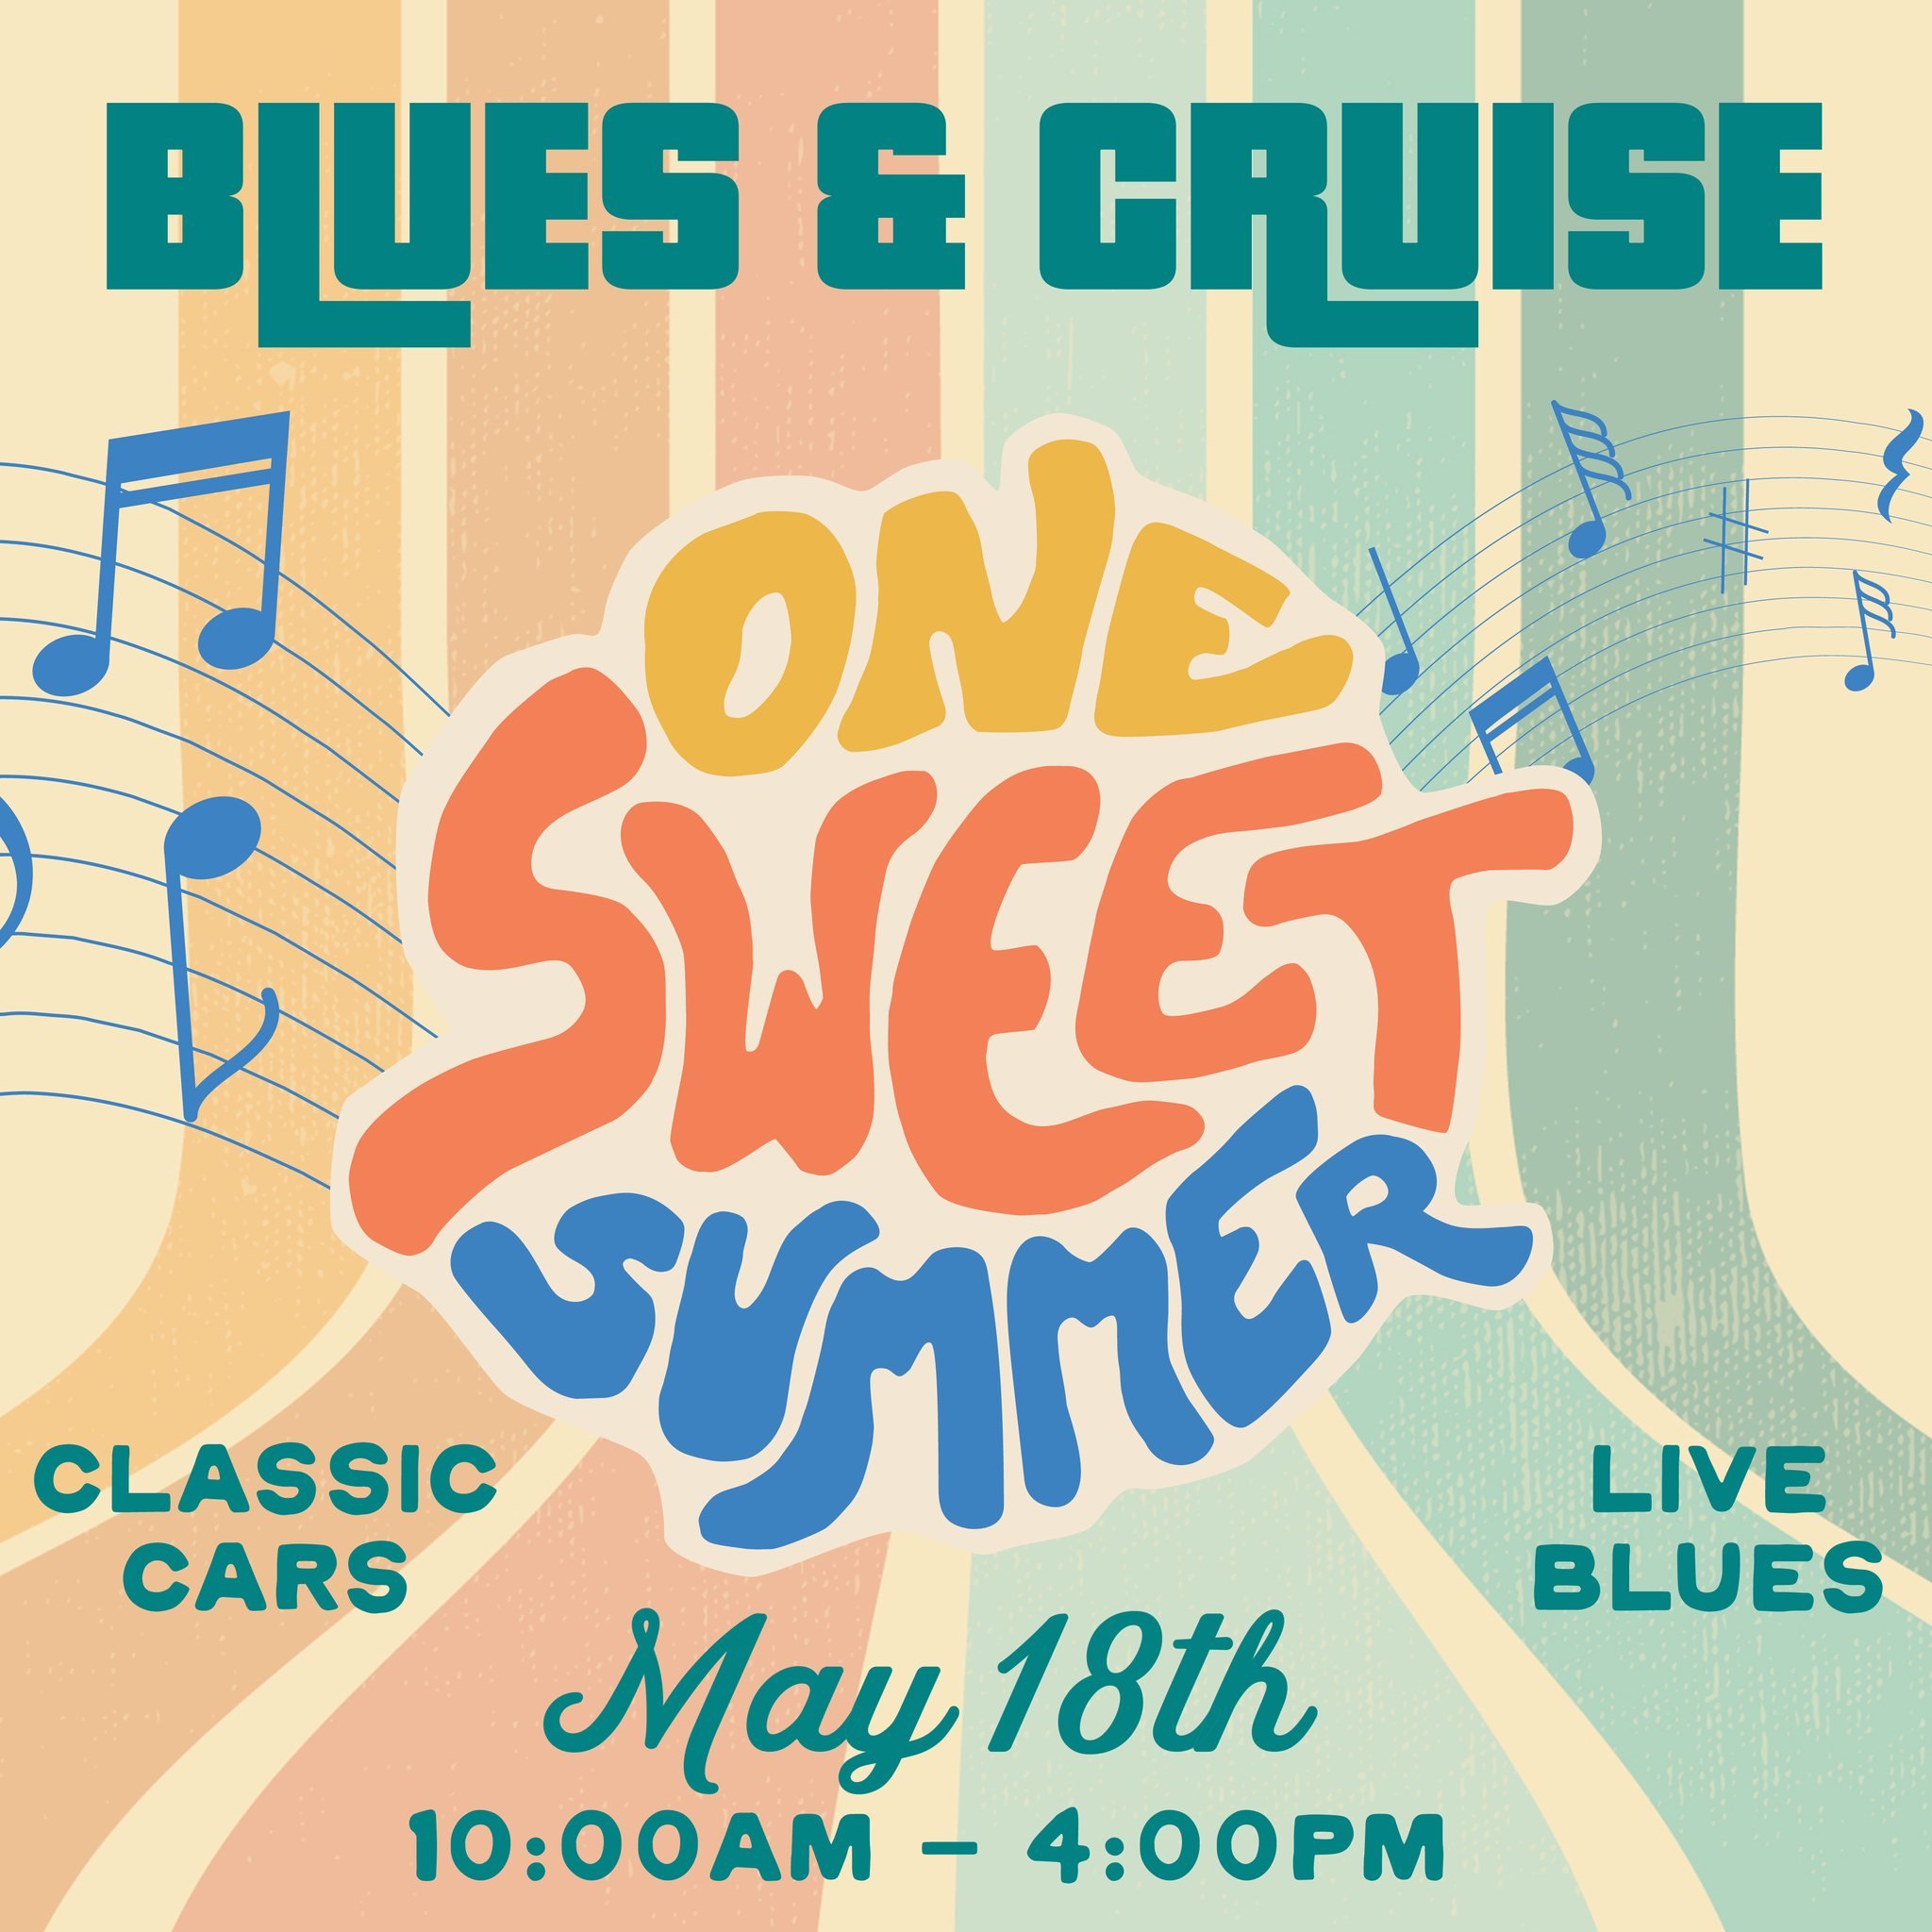 Rev up your weekend with the perfect blend of Blues Music and Classic Cars. On Saturday, May 18th, we&rsquo;ll have live performances from local blues bands and a showcase of classic cars. Thanks to our friends at the Road Nights Car Club for bringin